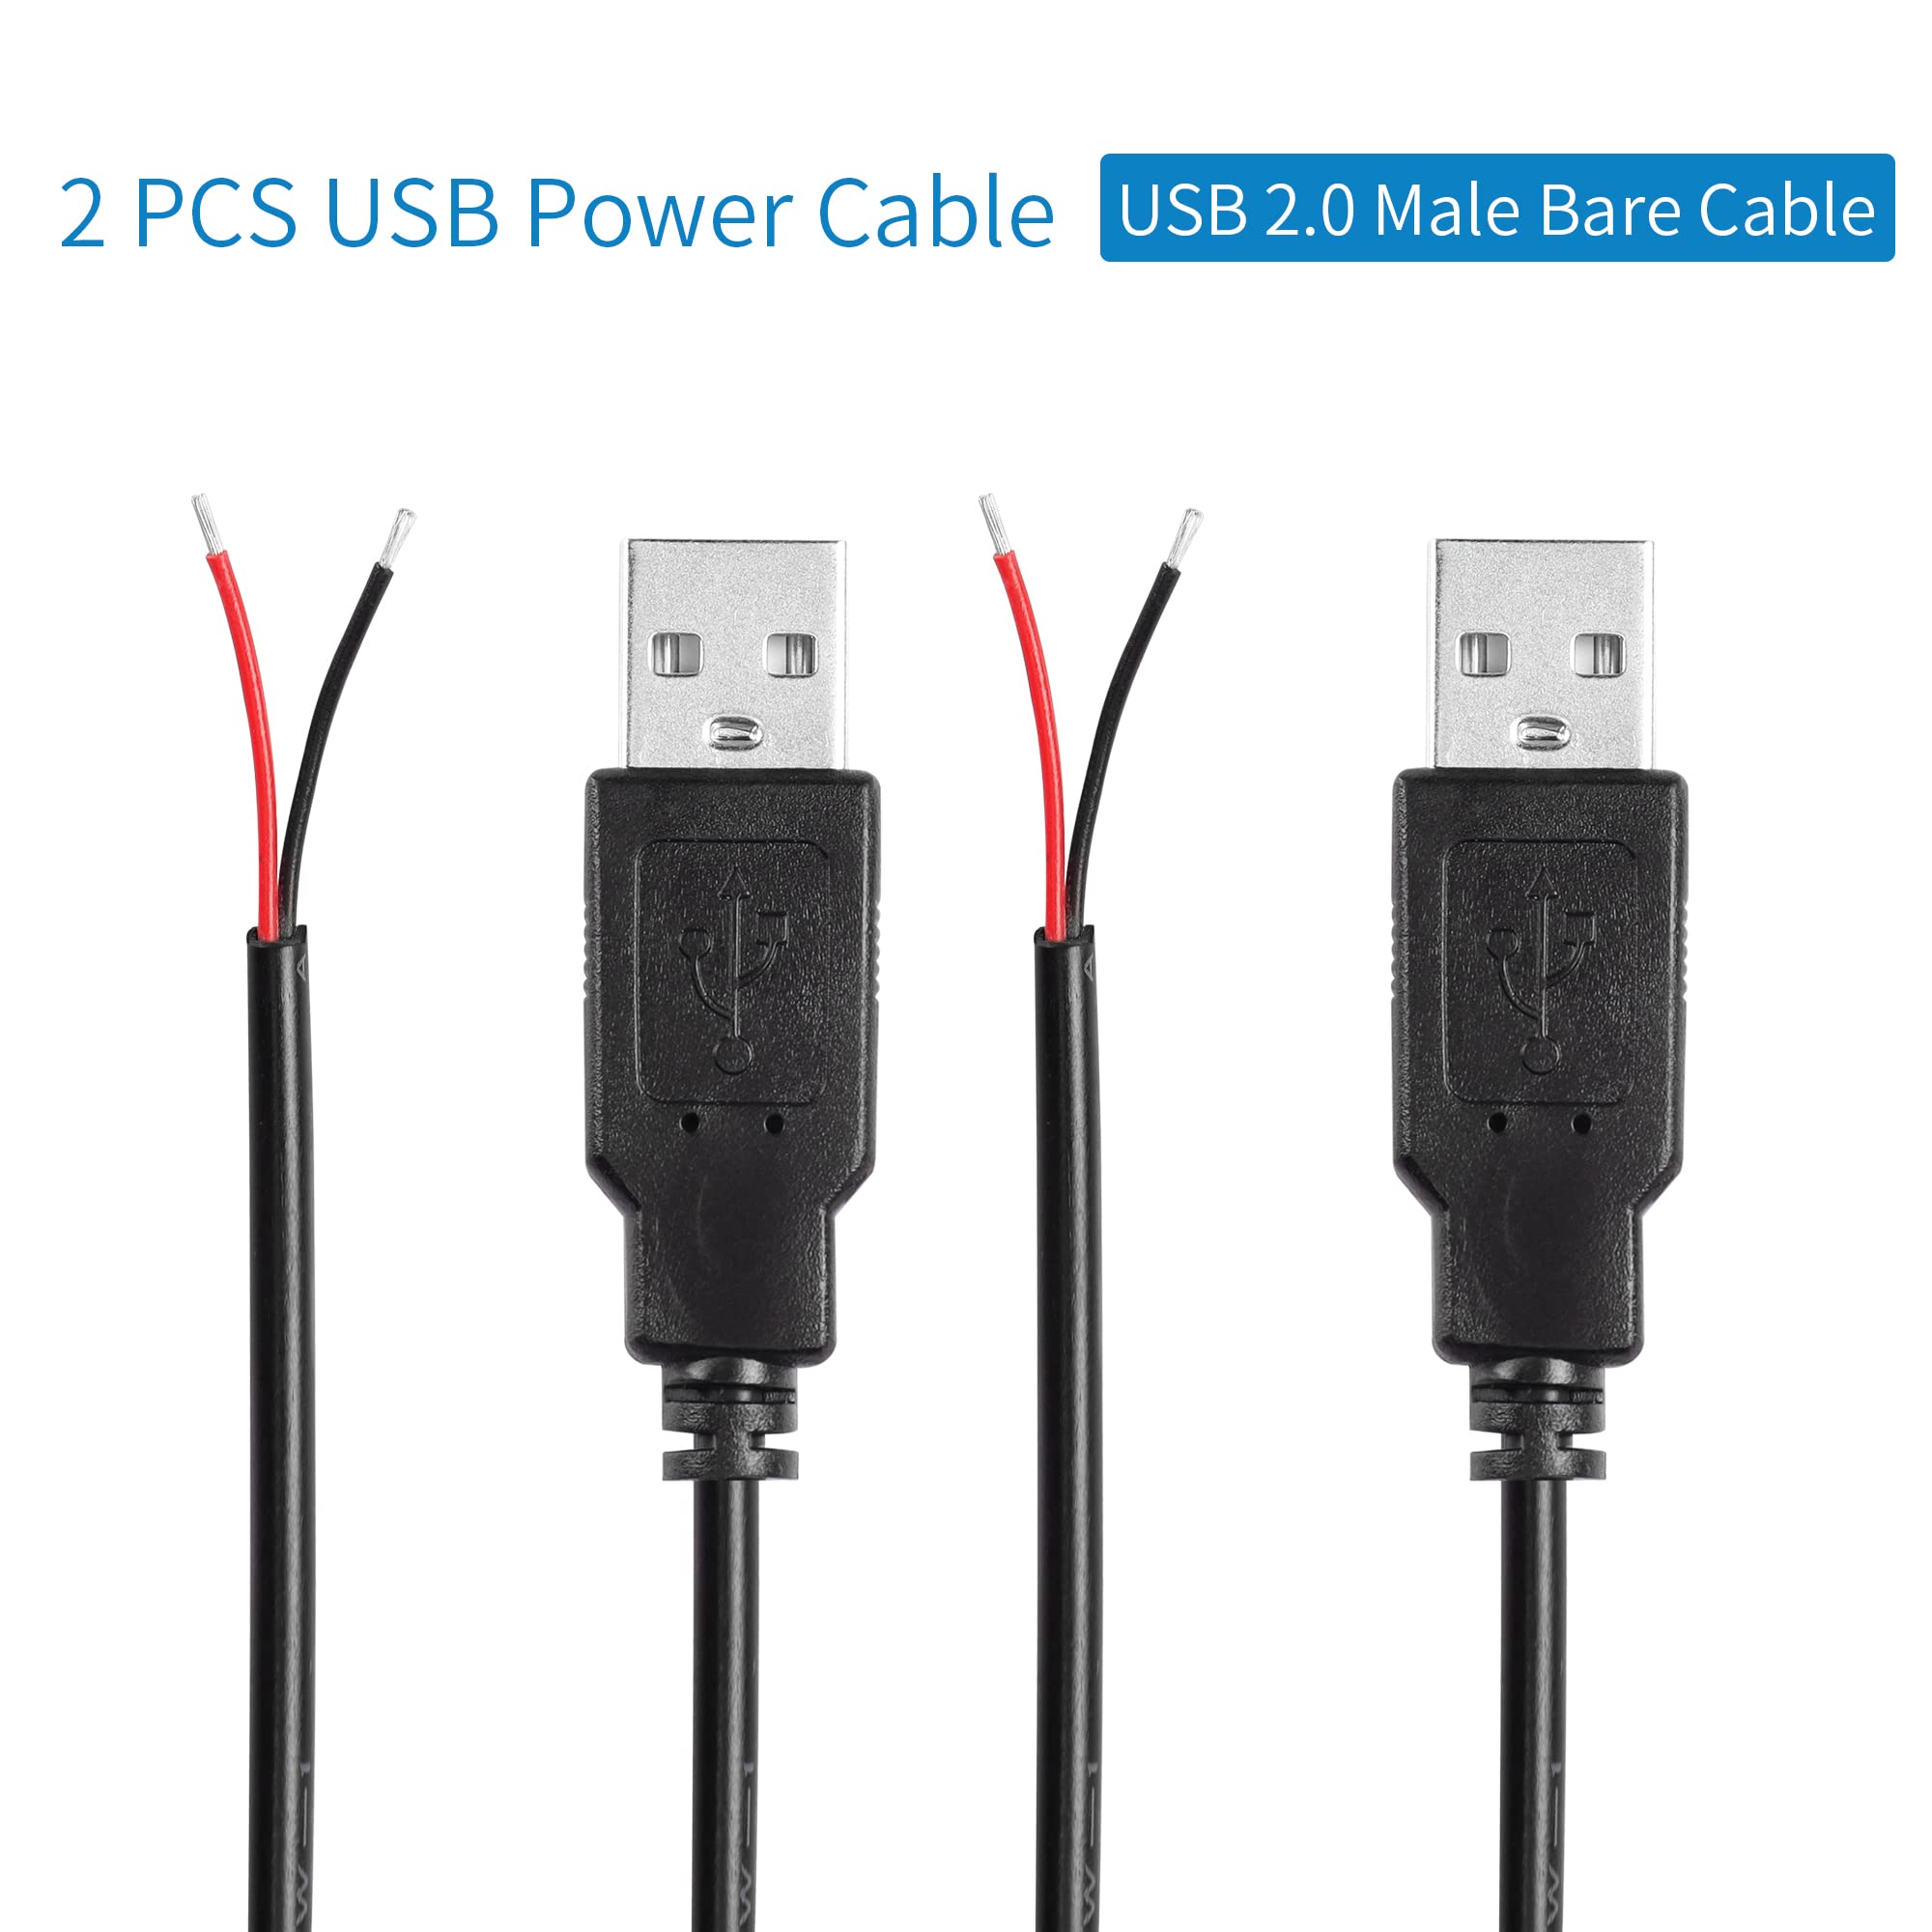 Power and data cable connection